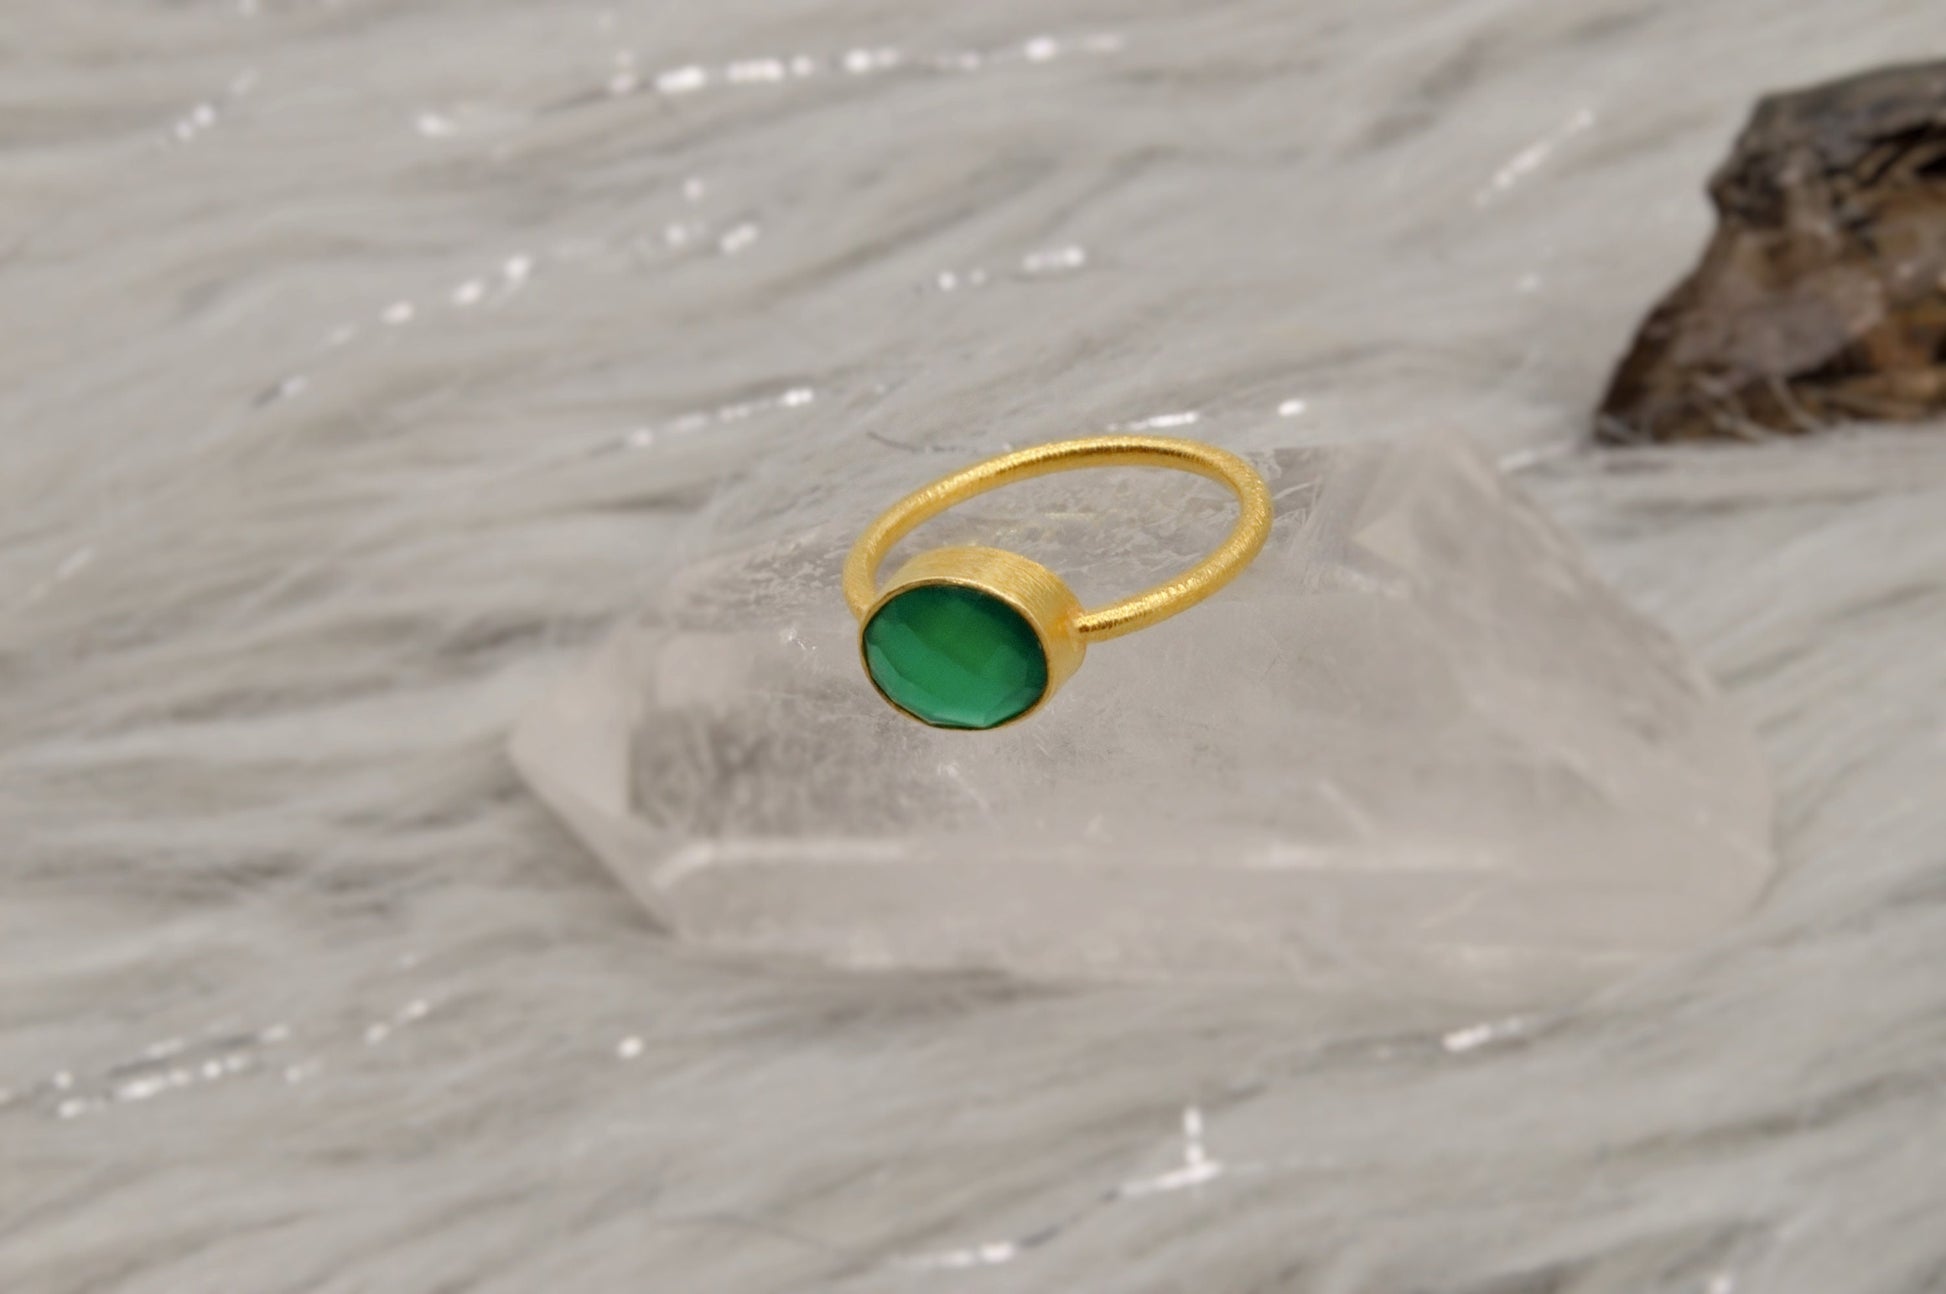 Green Onyx Gold Ring, Dainty Raw Gem Ring, Gold Plated Sterling Silver, Statement Gemstone, Stacking Rings For Women, Green Stone Ring